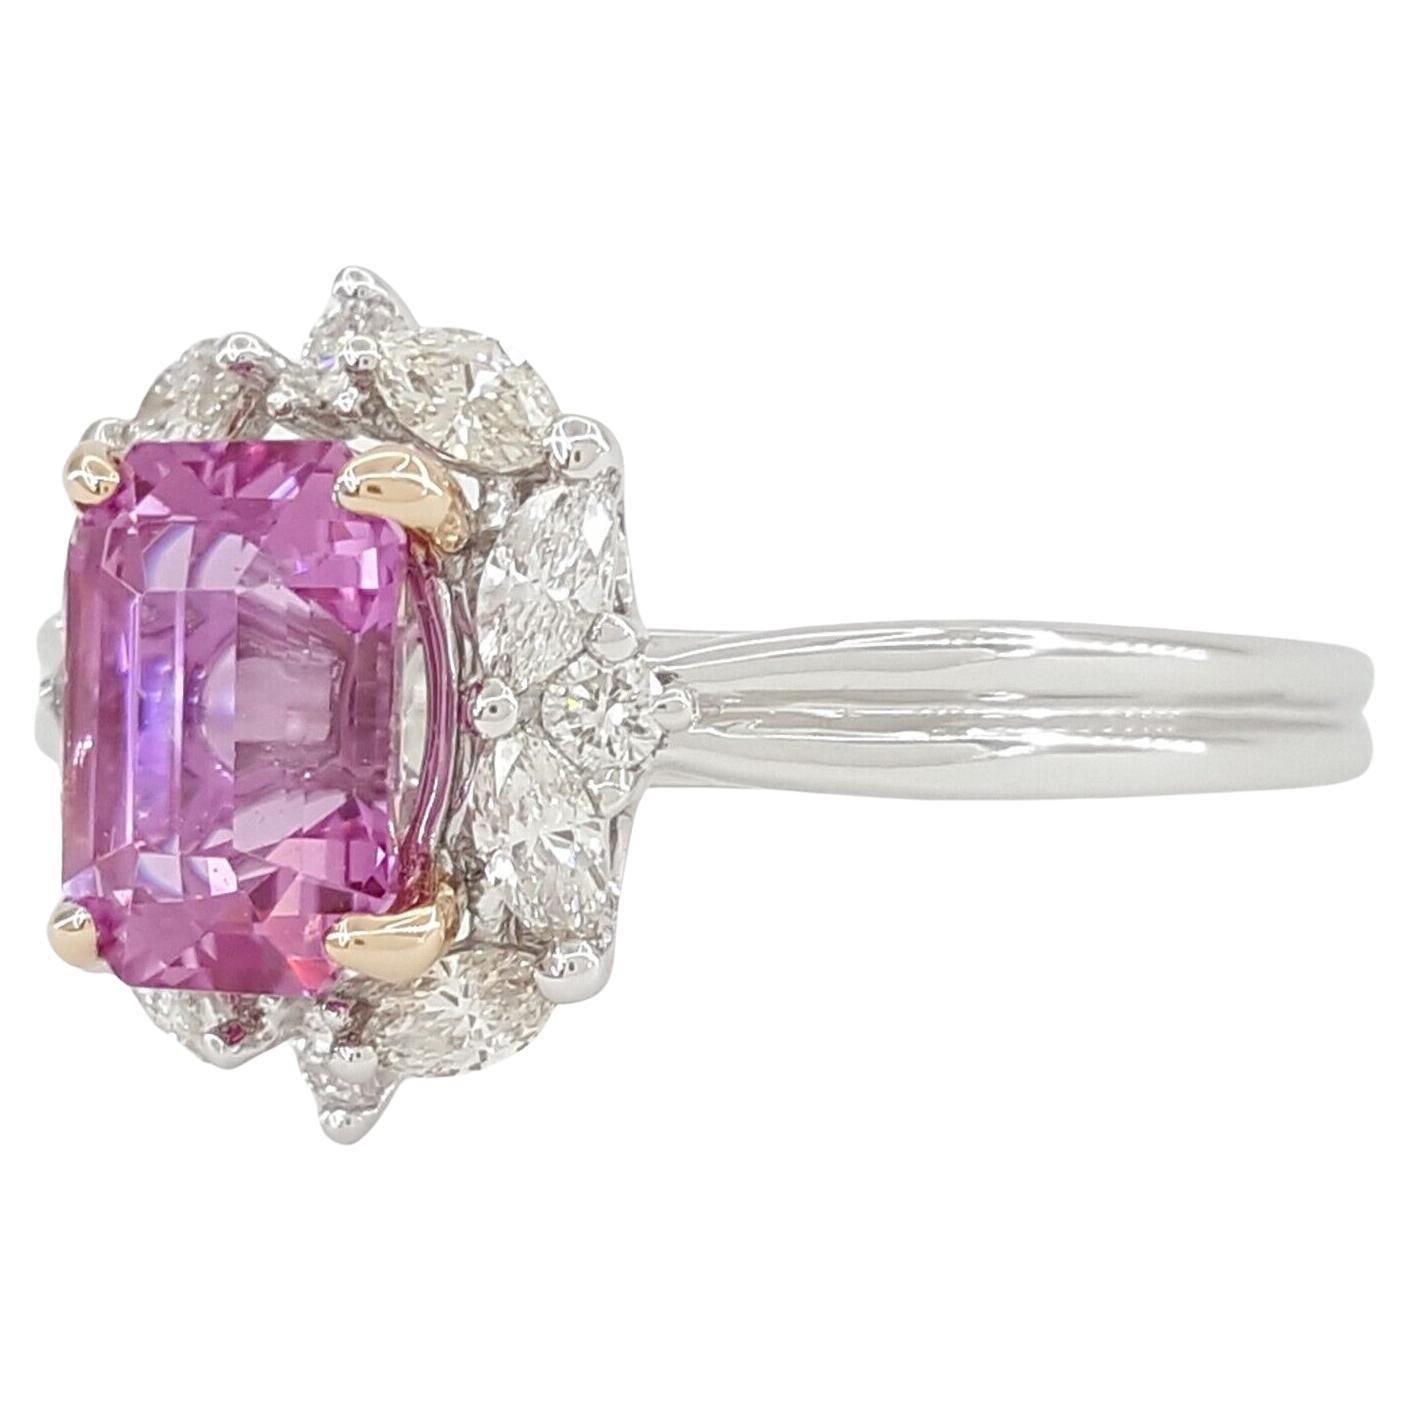 Emerald Cut Pink Sapphire Diamond Cocktail Ring For Sale